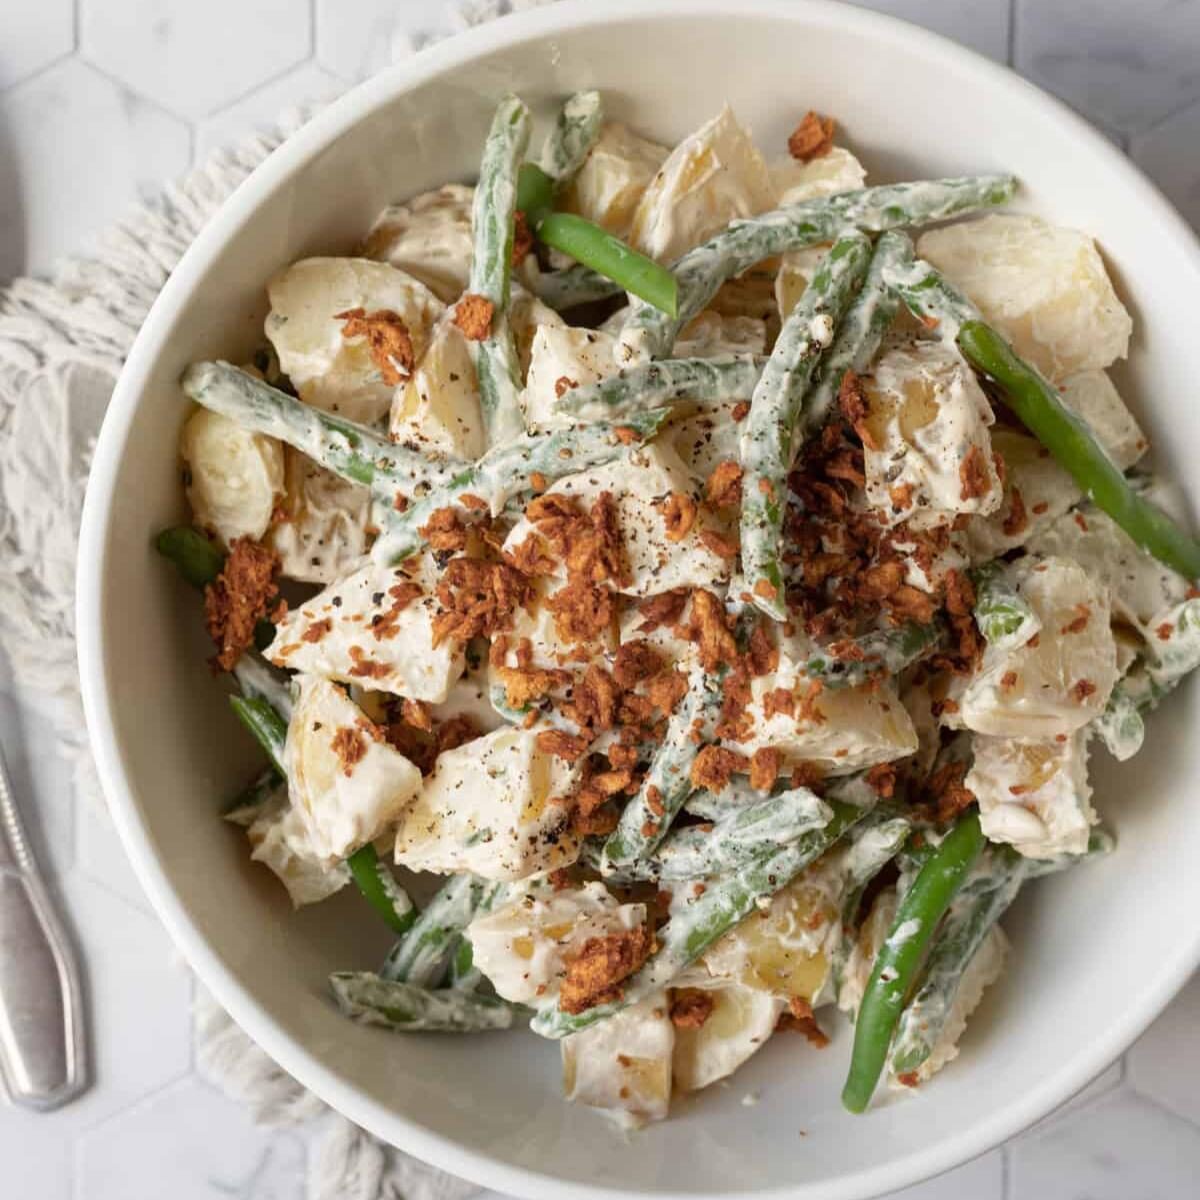 Bowl of creamy potato salad with green beans and vegan bacon crumbles.